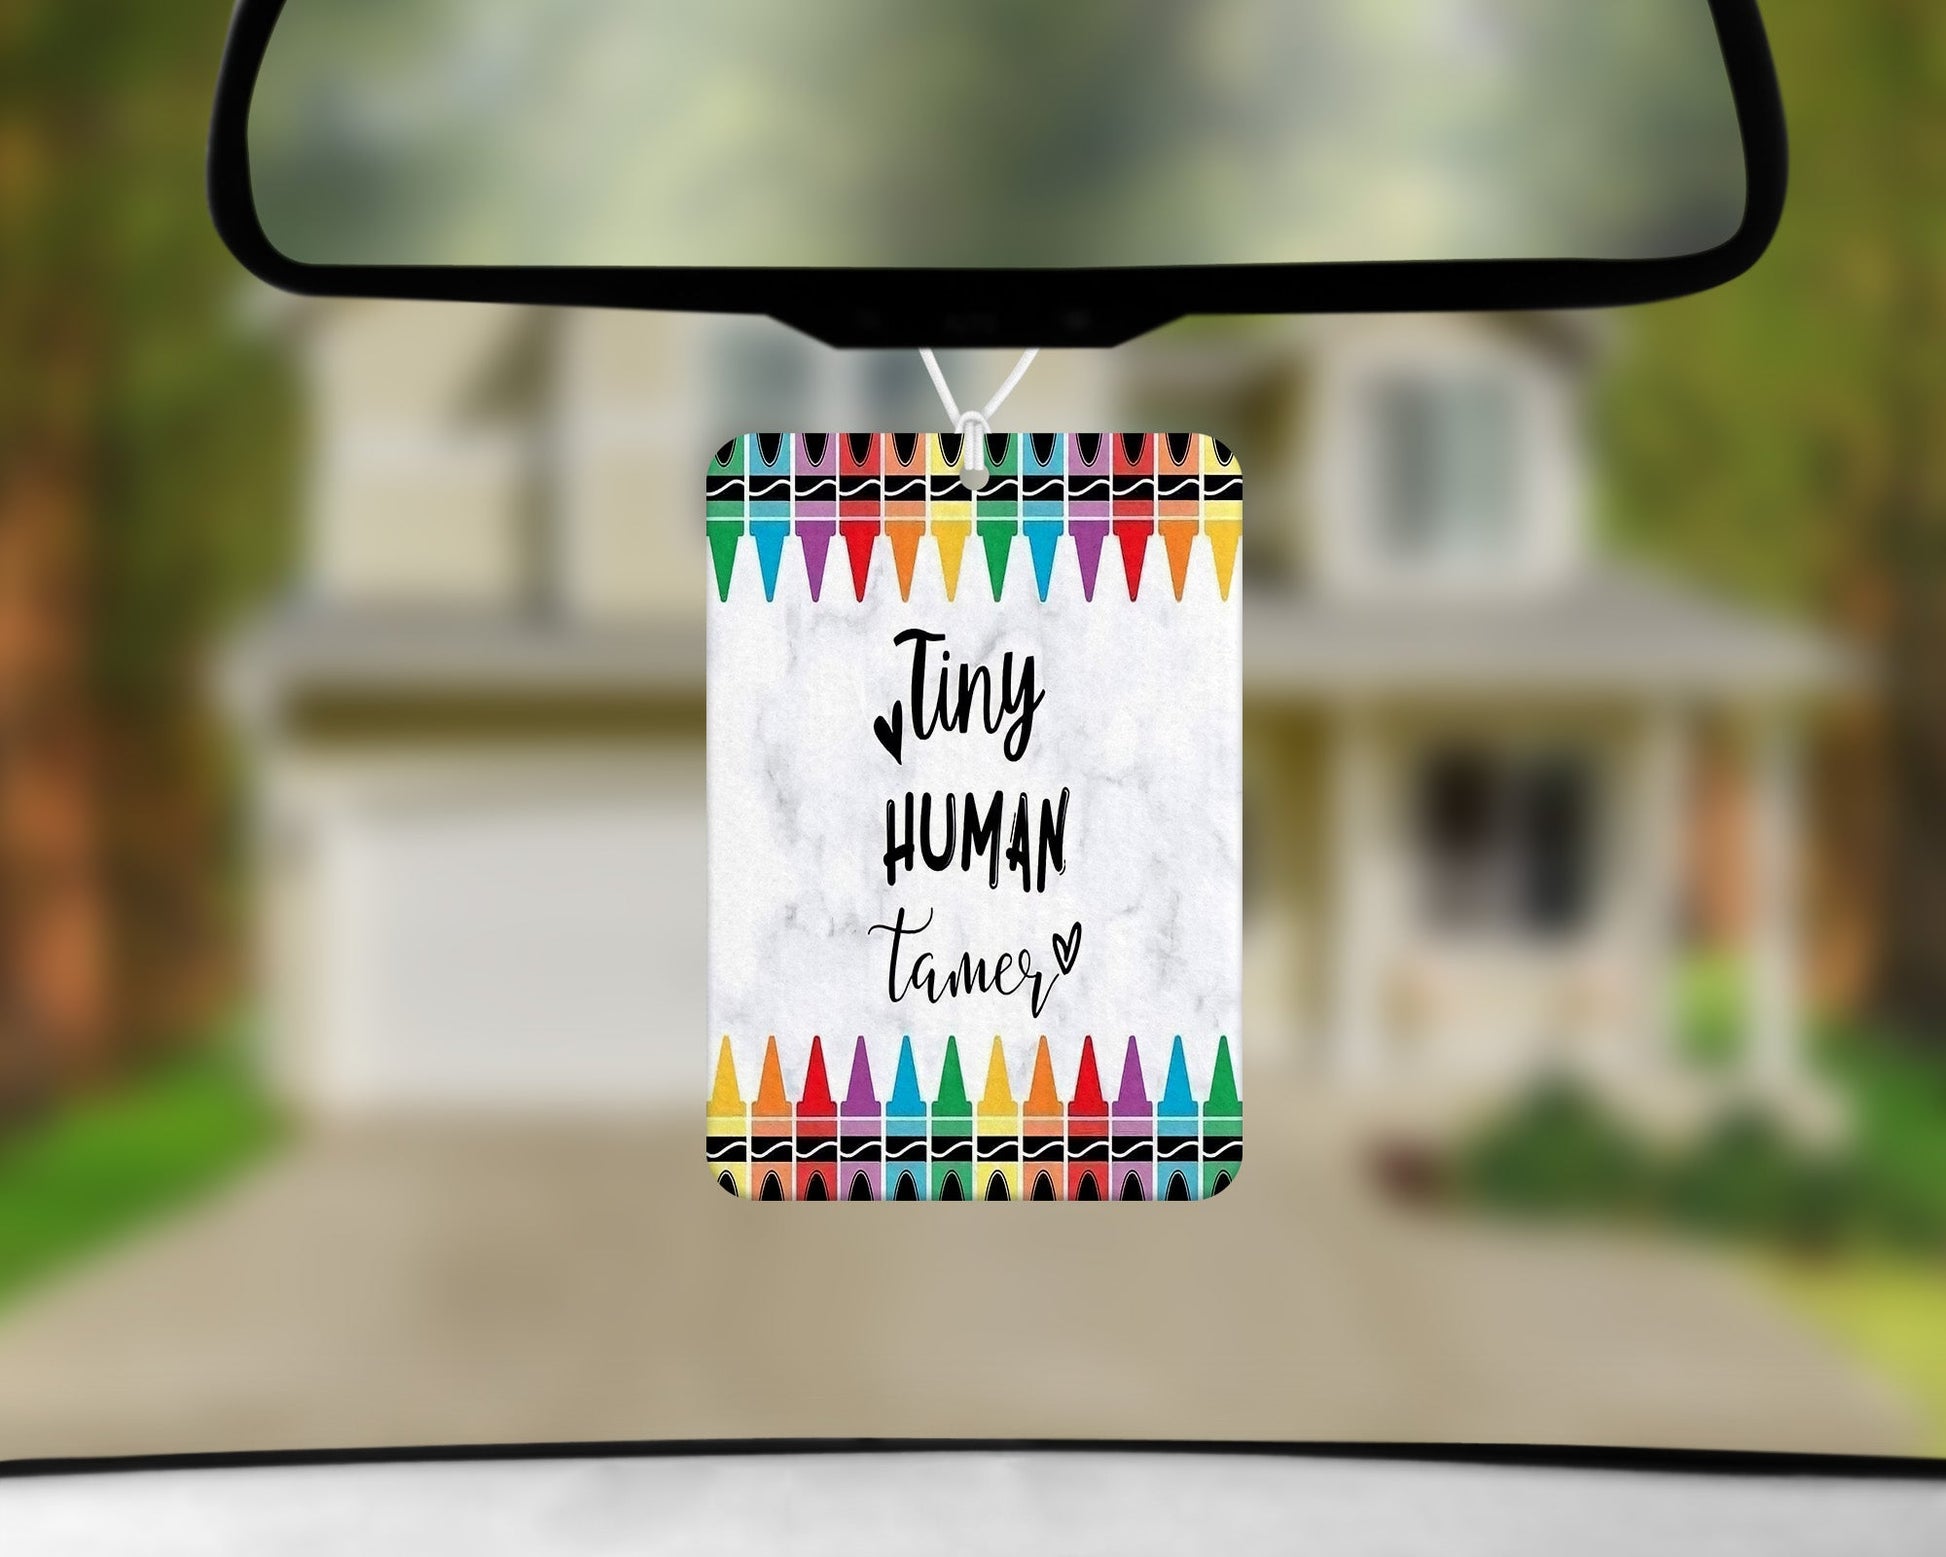 Tiny Human Tamer|Freshie|Includes Scent Bottle - Vehicle Air Freshener